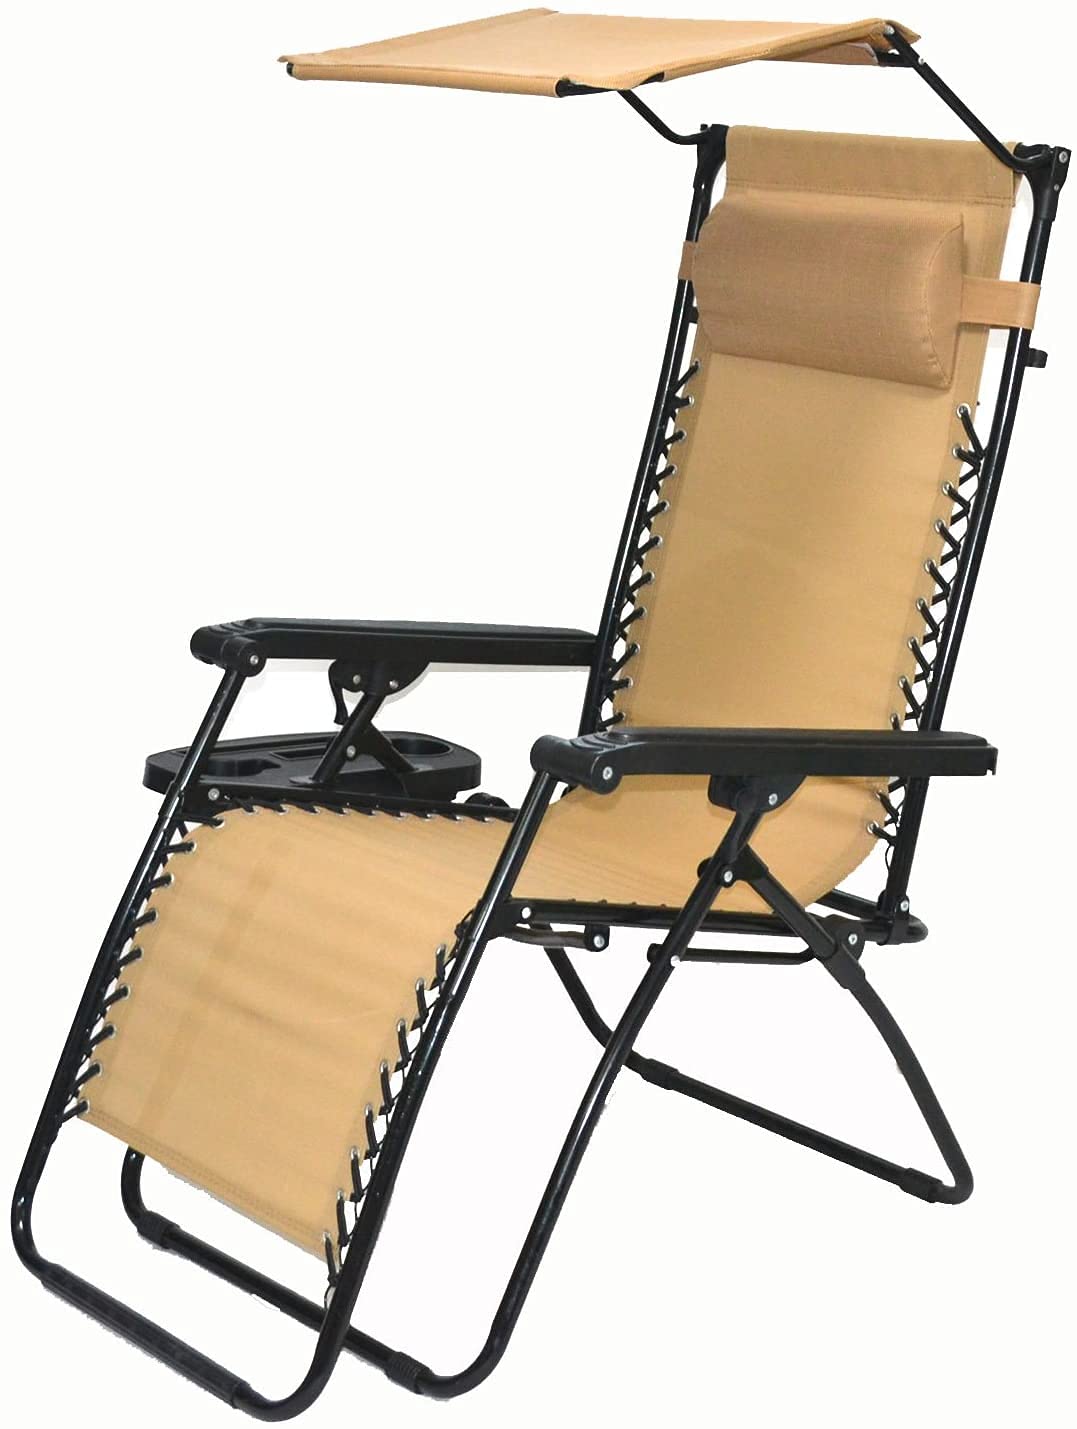 BTEXPERT CC5044BG-2 Zero Gravity Chair Lounge Outdoor Pool Patio Beach Yard Garden Sunshade Utility Tray Cup Holder Beige Two Case Pack (Set of 2 pcs), Piece, Tan with Canopy Two Piece